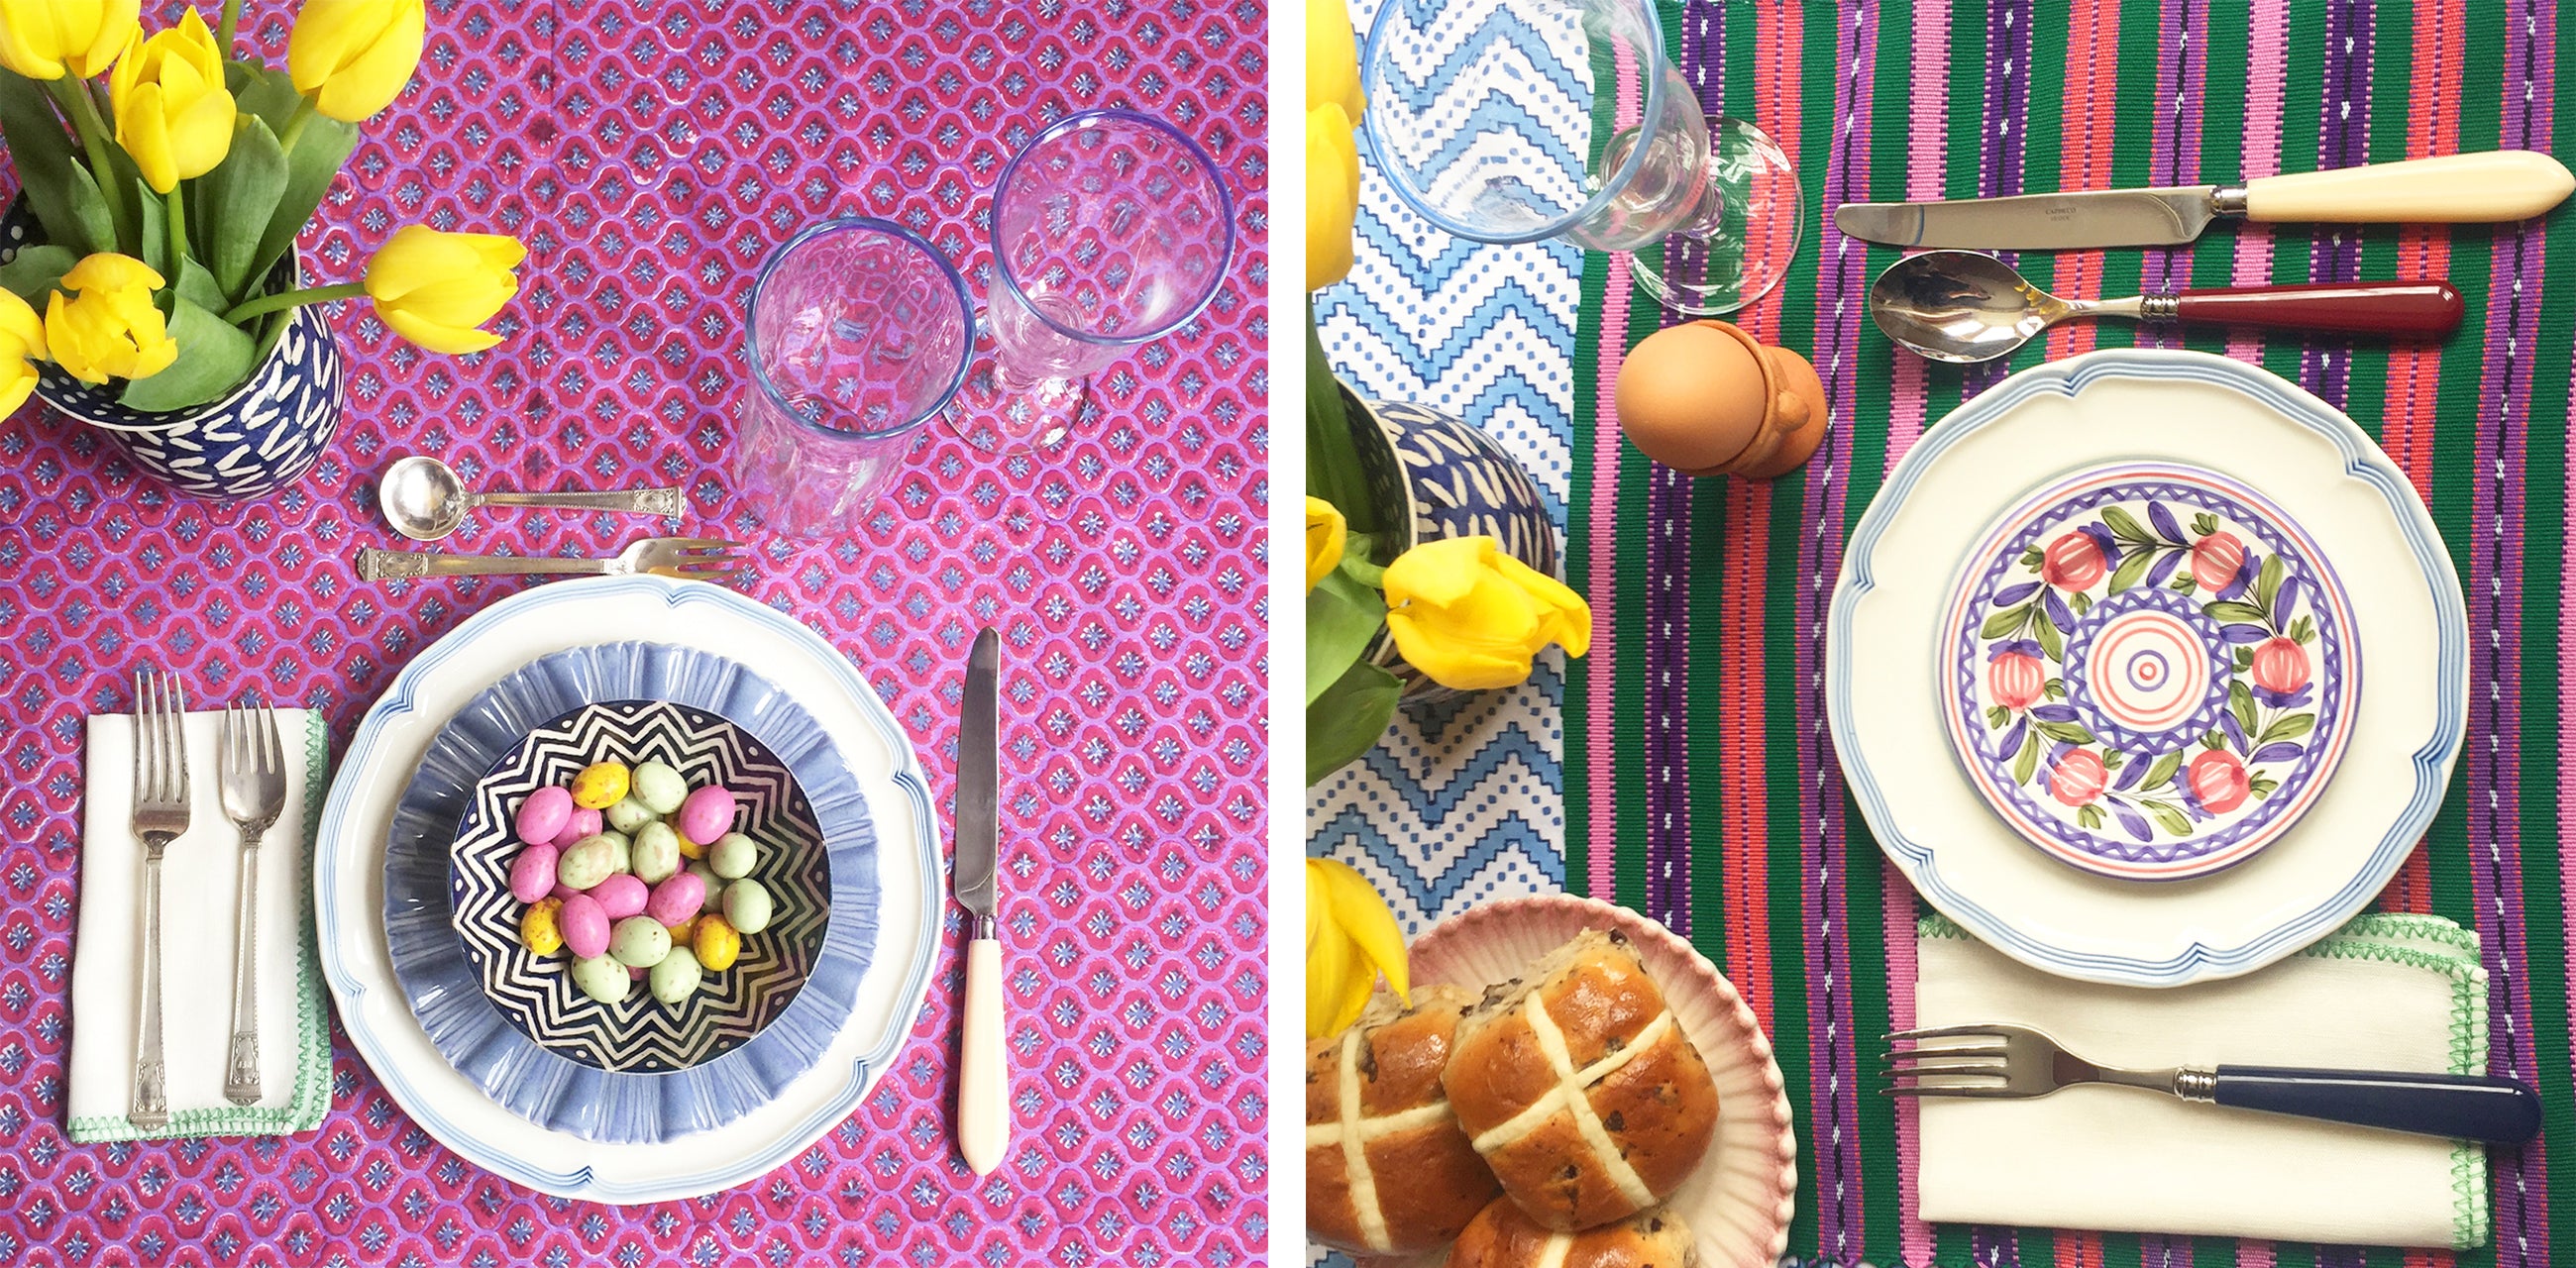 Colourful Easter table top decorating ideas, using hand block printed table cloths and hand-woven table placemats to transform your Easter Sunday table top